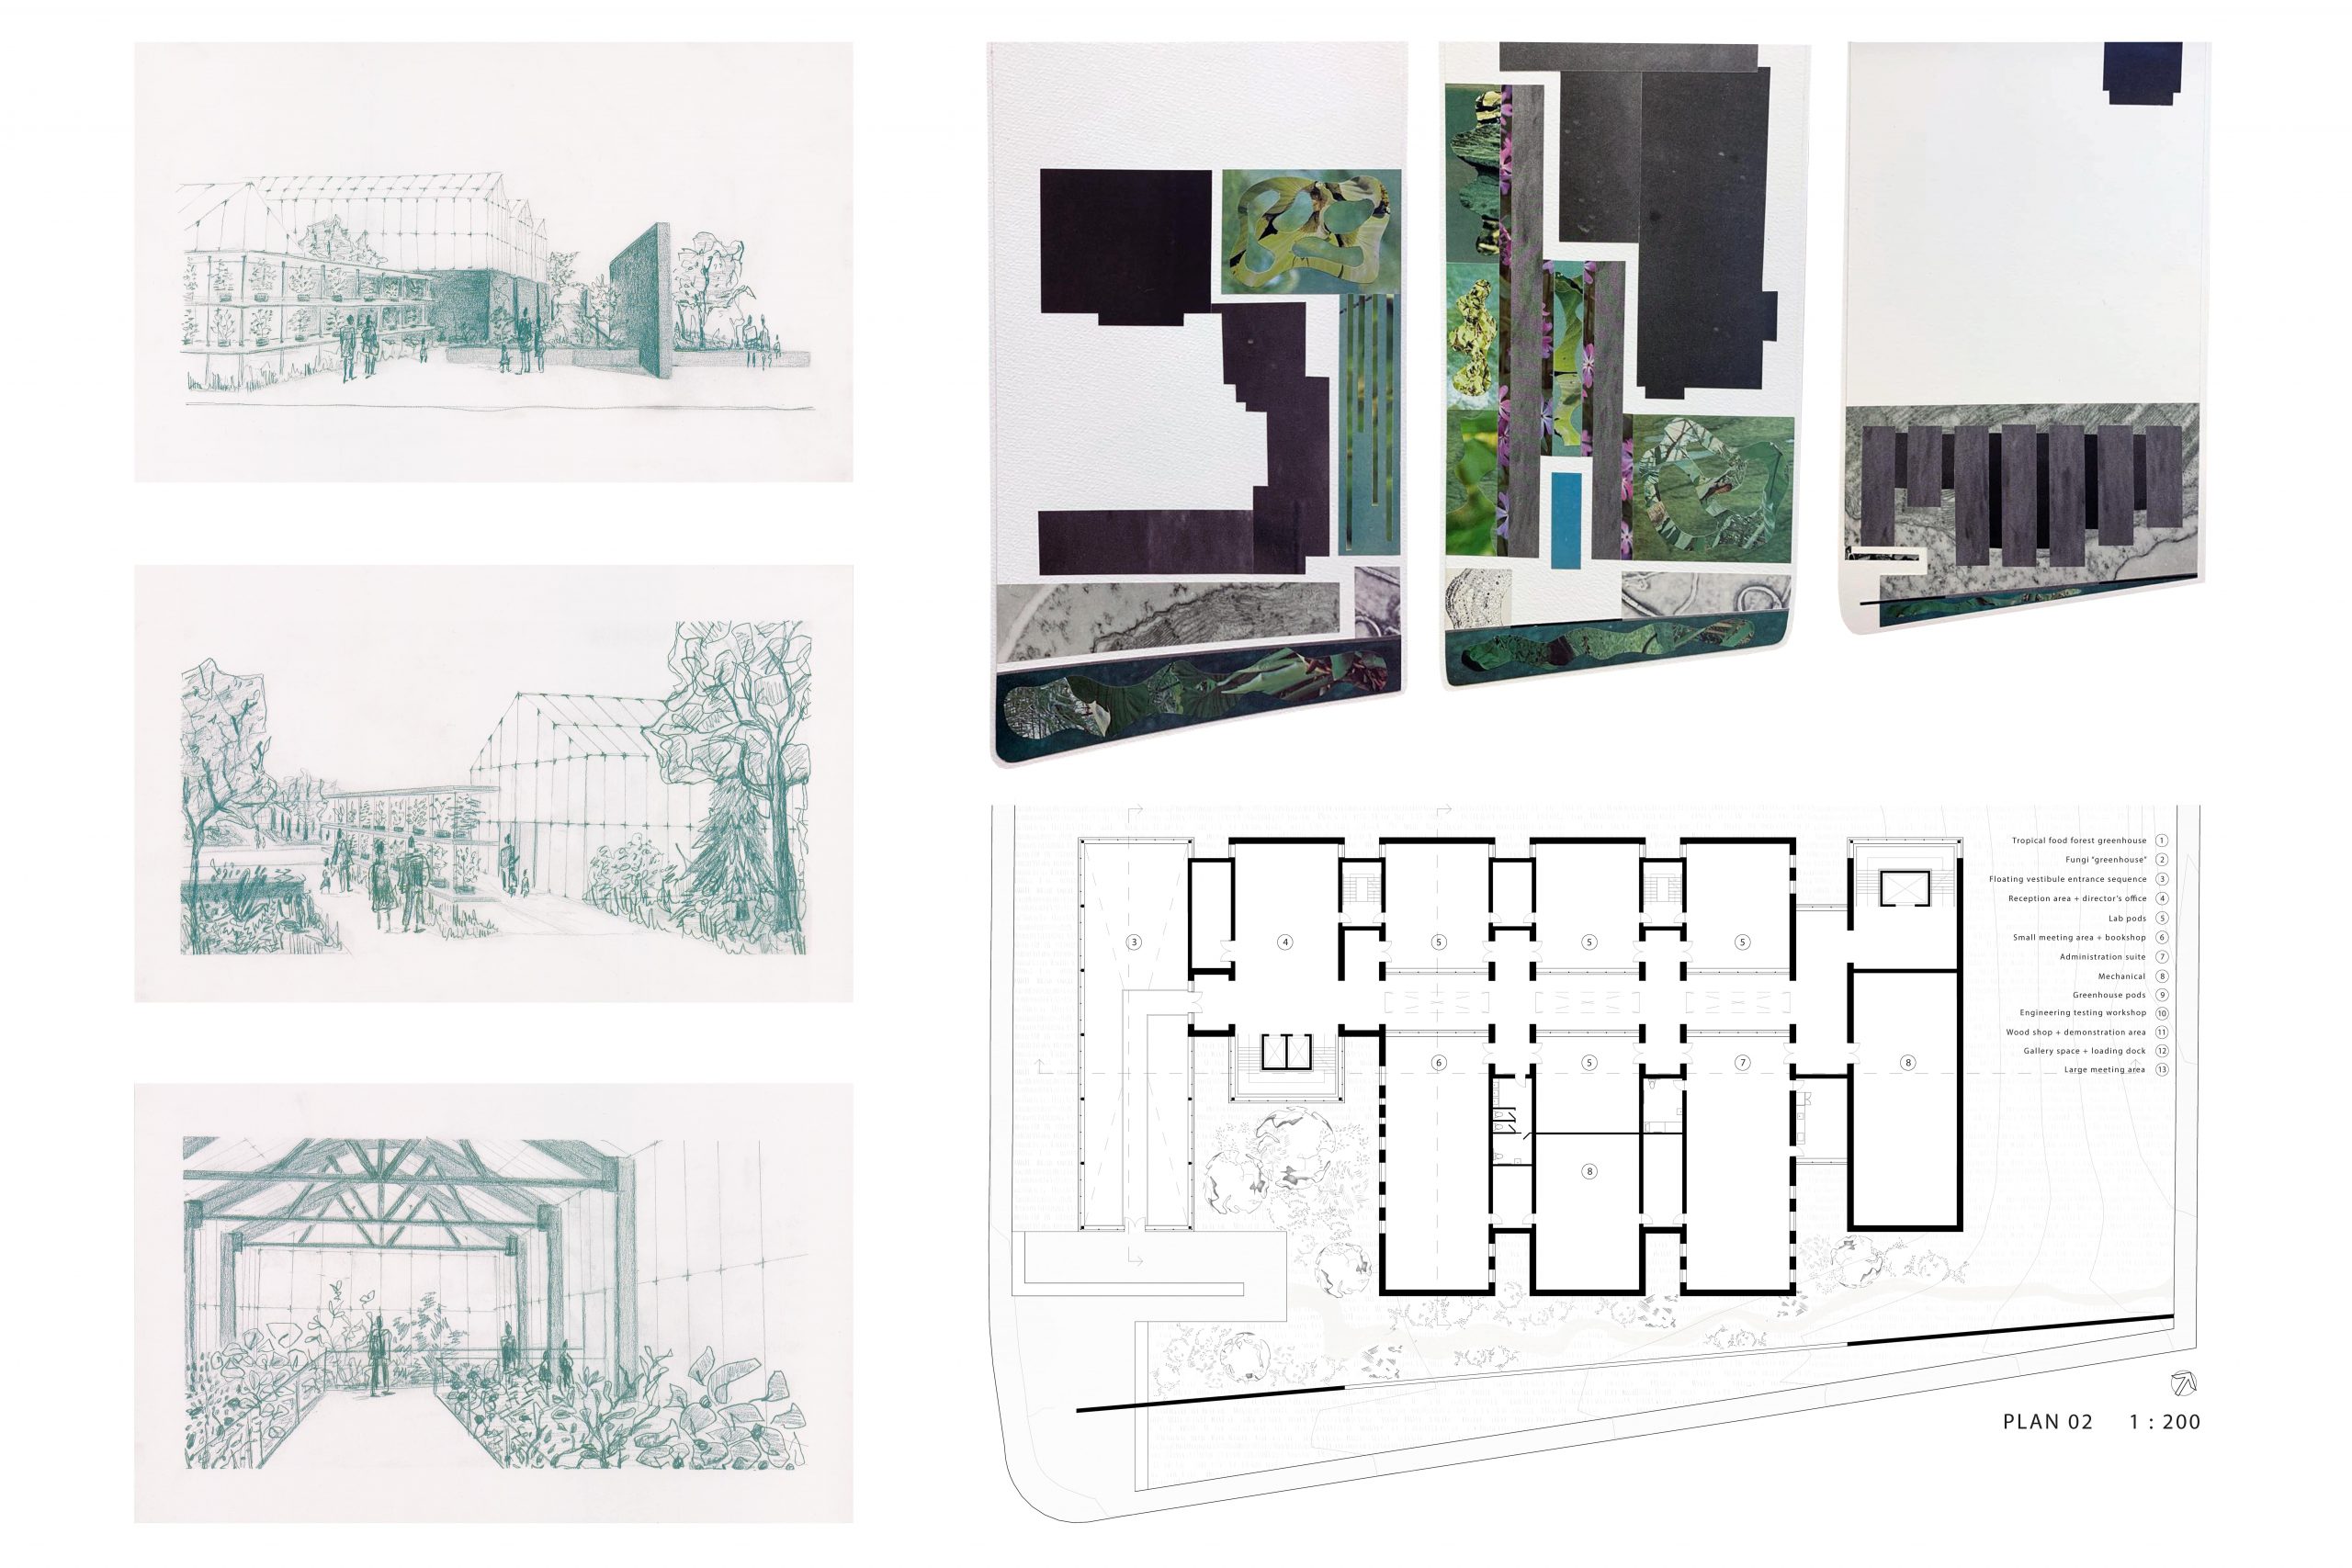 A collection of architectural sketches, photomontages, and floor plans for a building project.